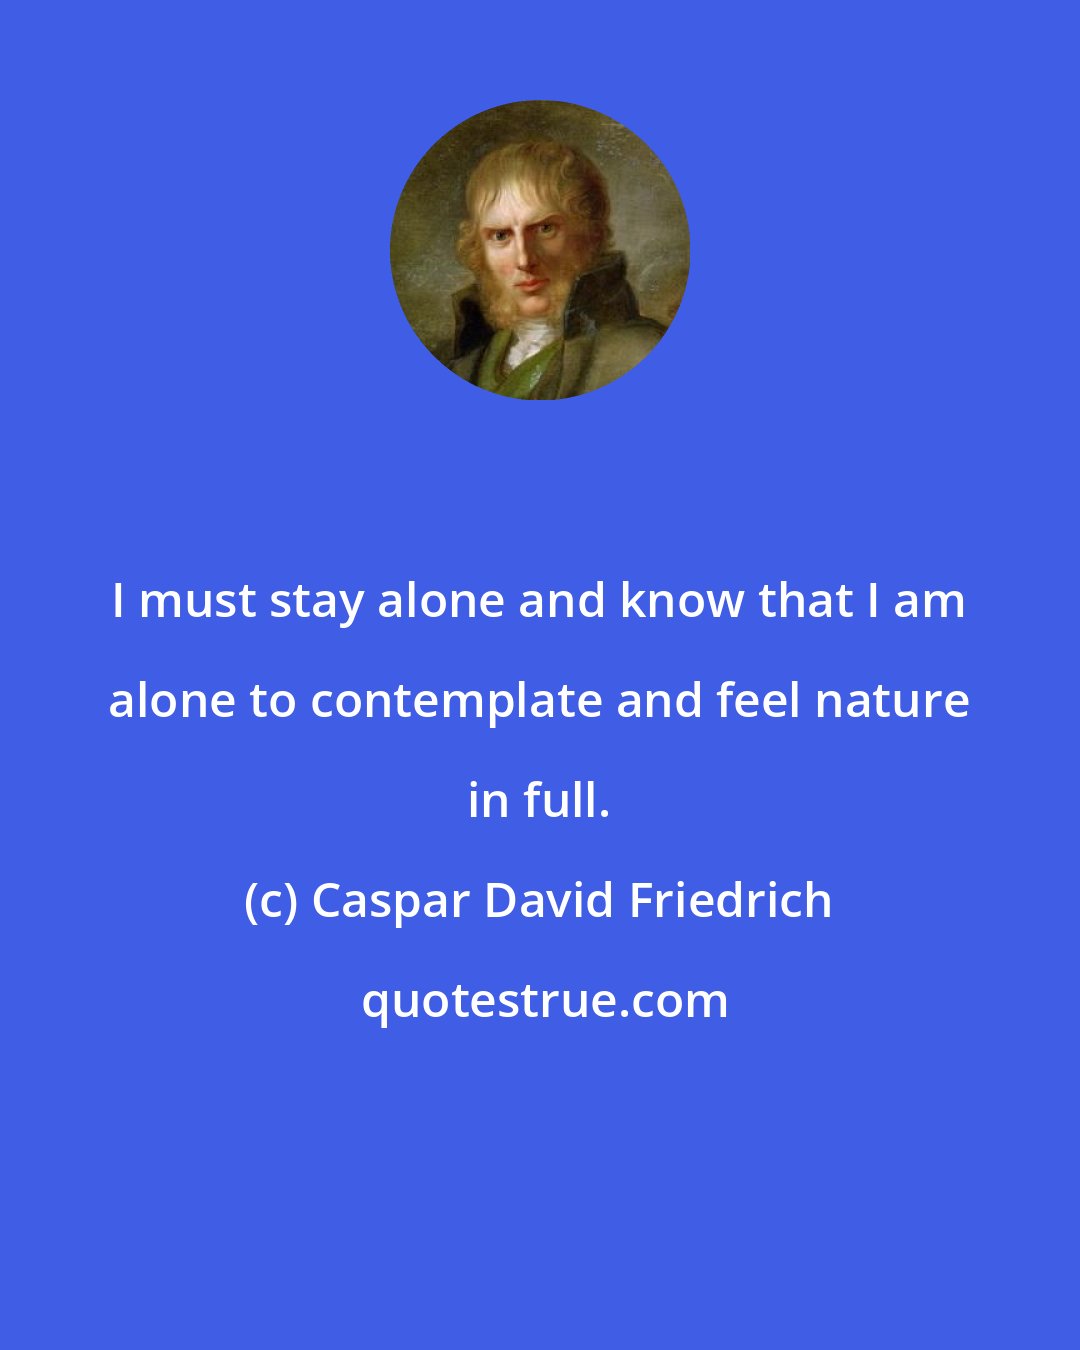 Caspar David Friedrich: I must stay alone and know that I am alone to contemplate and feel nature in full.